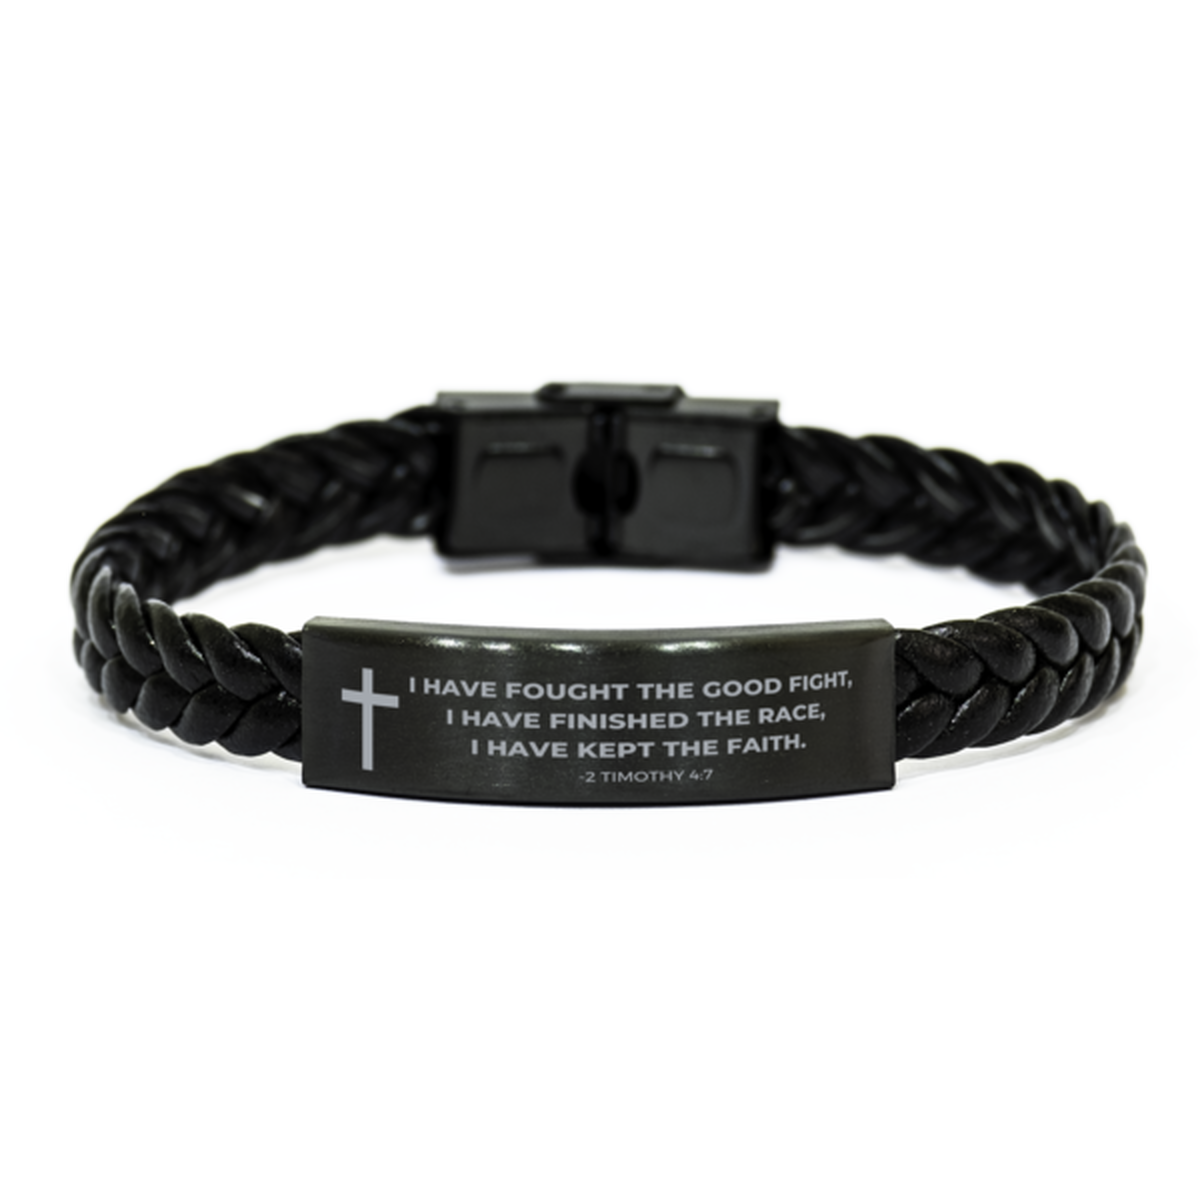 Baptism Gifts For Teenage Boys Girls, Christian Bible Verse Braided Leather Bracelet, I have fought the good fight, Catholic Confirmation Gifts for Son, Godson, Grandson, Nephew